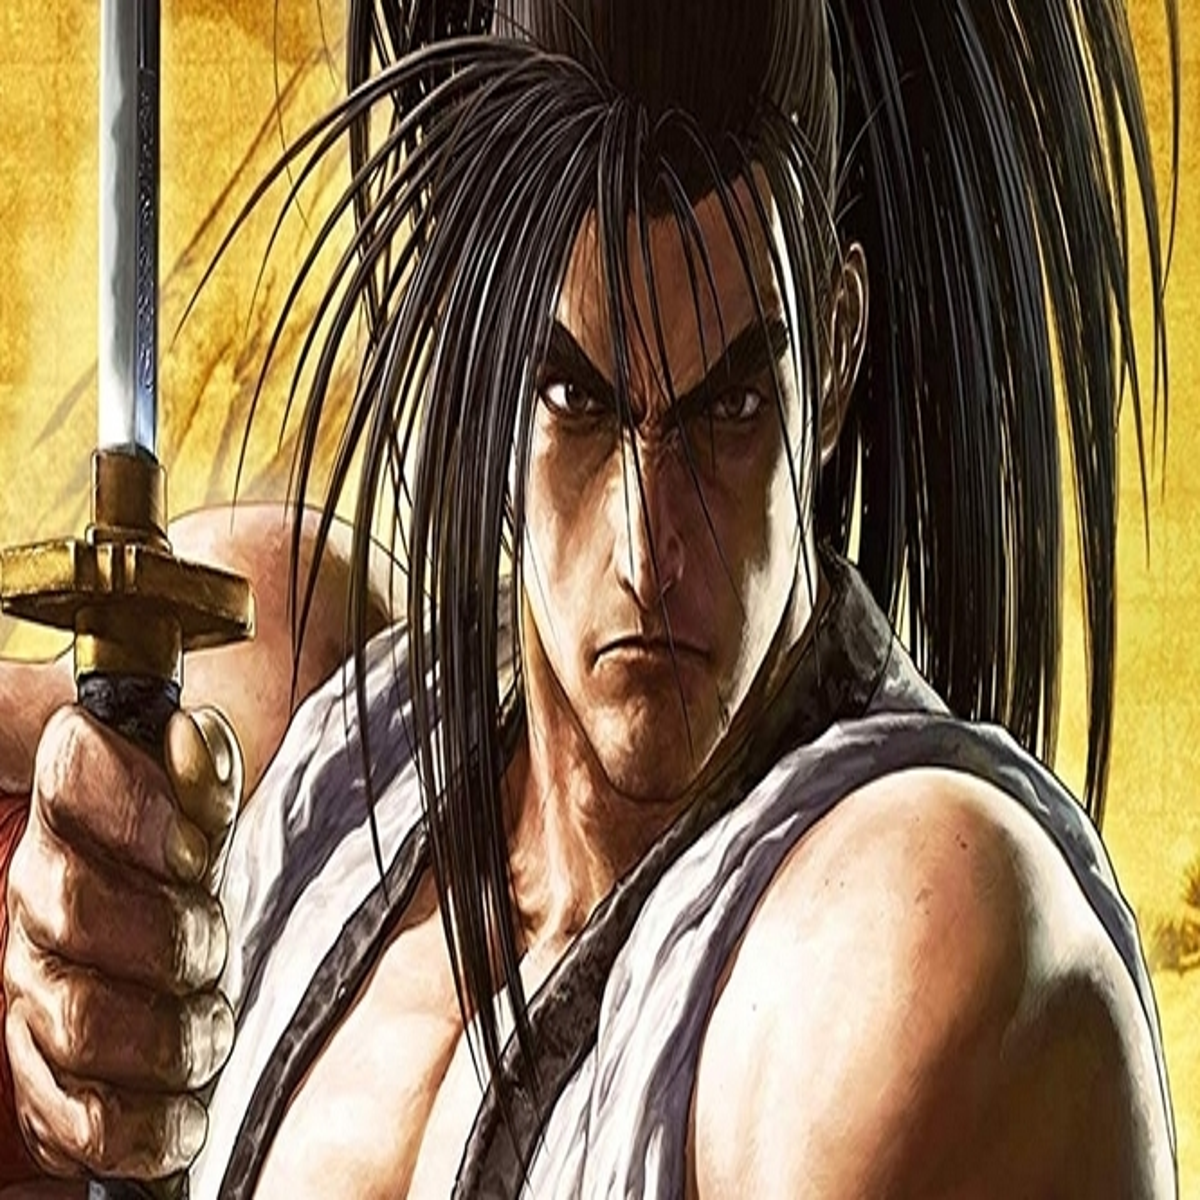 The last SAMURAI SHODOWN for the NEOGEO makes it to Steam! SAMURAI SHODOWN  V SPECIAL is now available on PC!｜NEWS RELEASE｜SNK USA